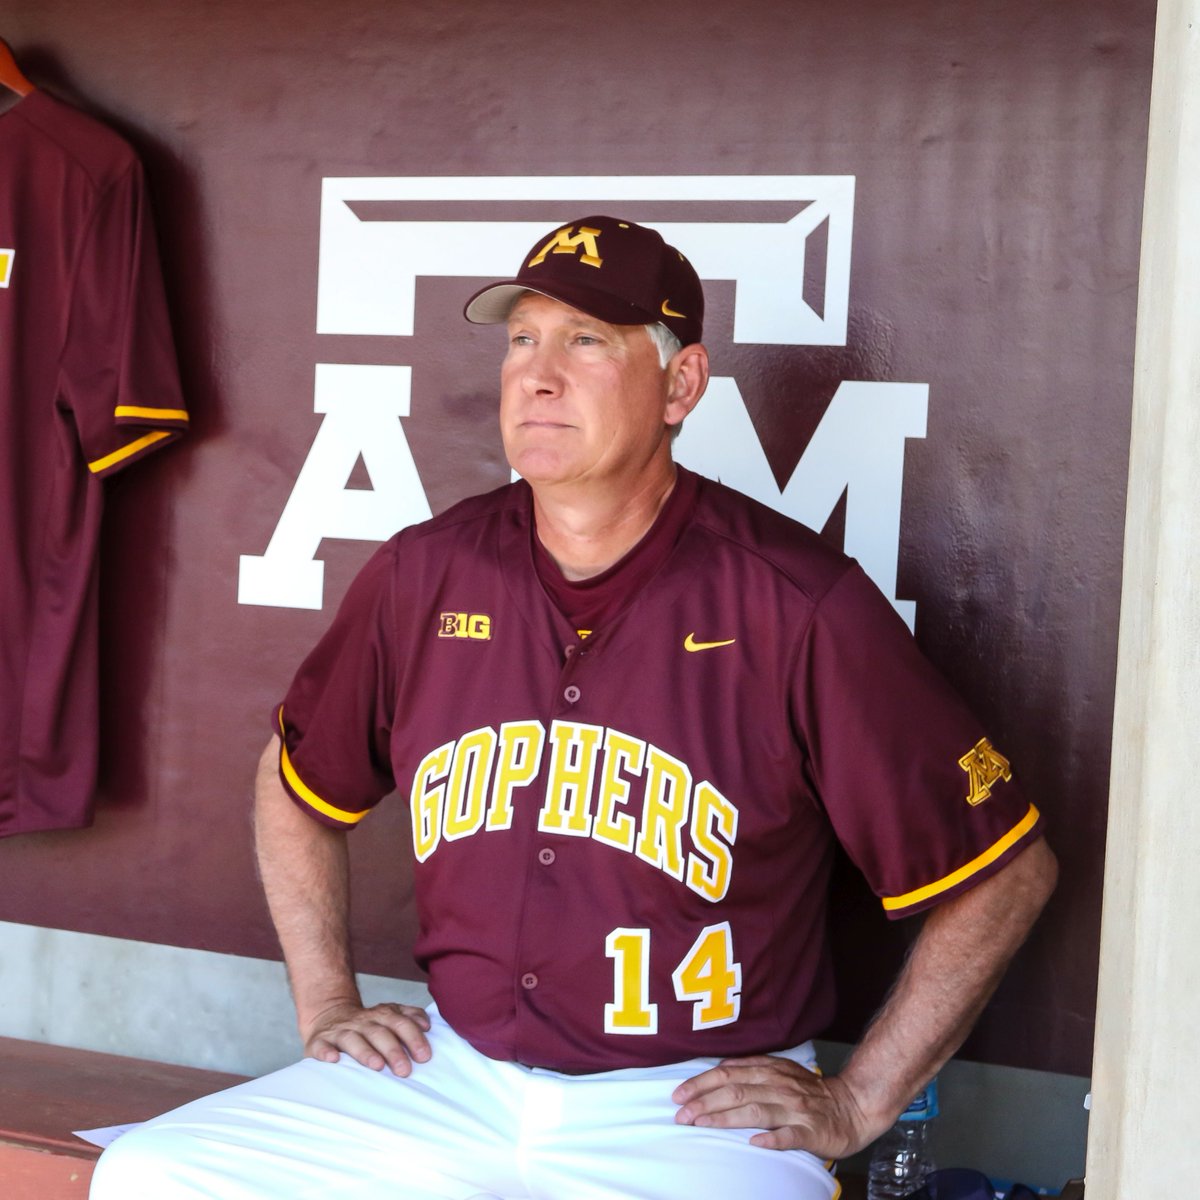 1️⃣4️⃣ is synonymous with Gopher baseball〽 On Saturday, the #Gophers will retire the number worn by Coach Anderson for the past 49 years. Fans are encouraged to be in their seats by 1:15 p.m. to help honor our legendary coach. Read the full story below⤵️ z.umn.edu/9j2t